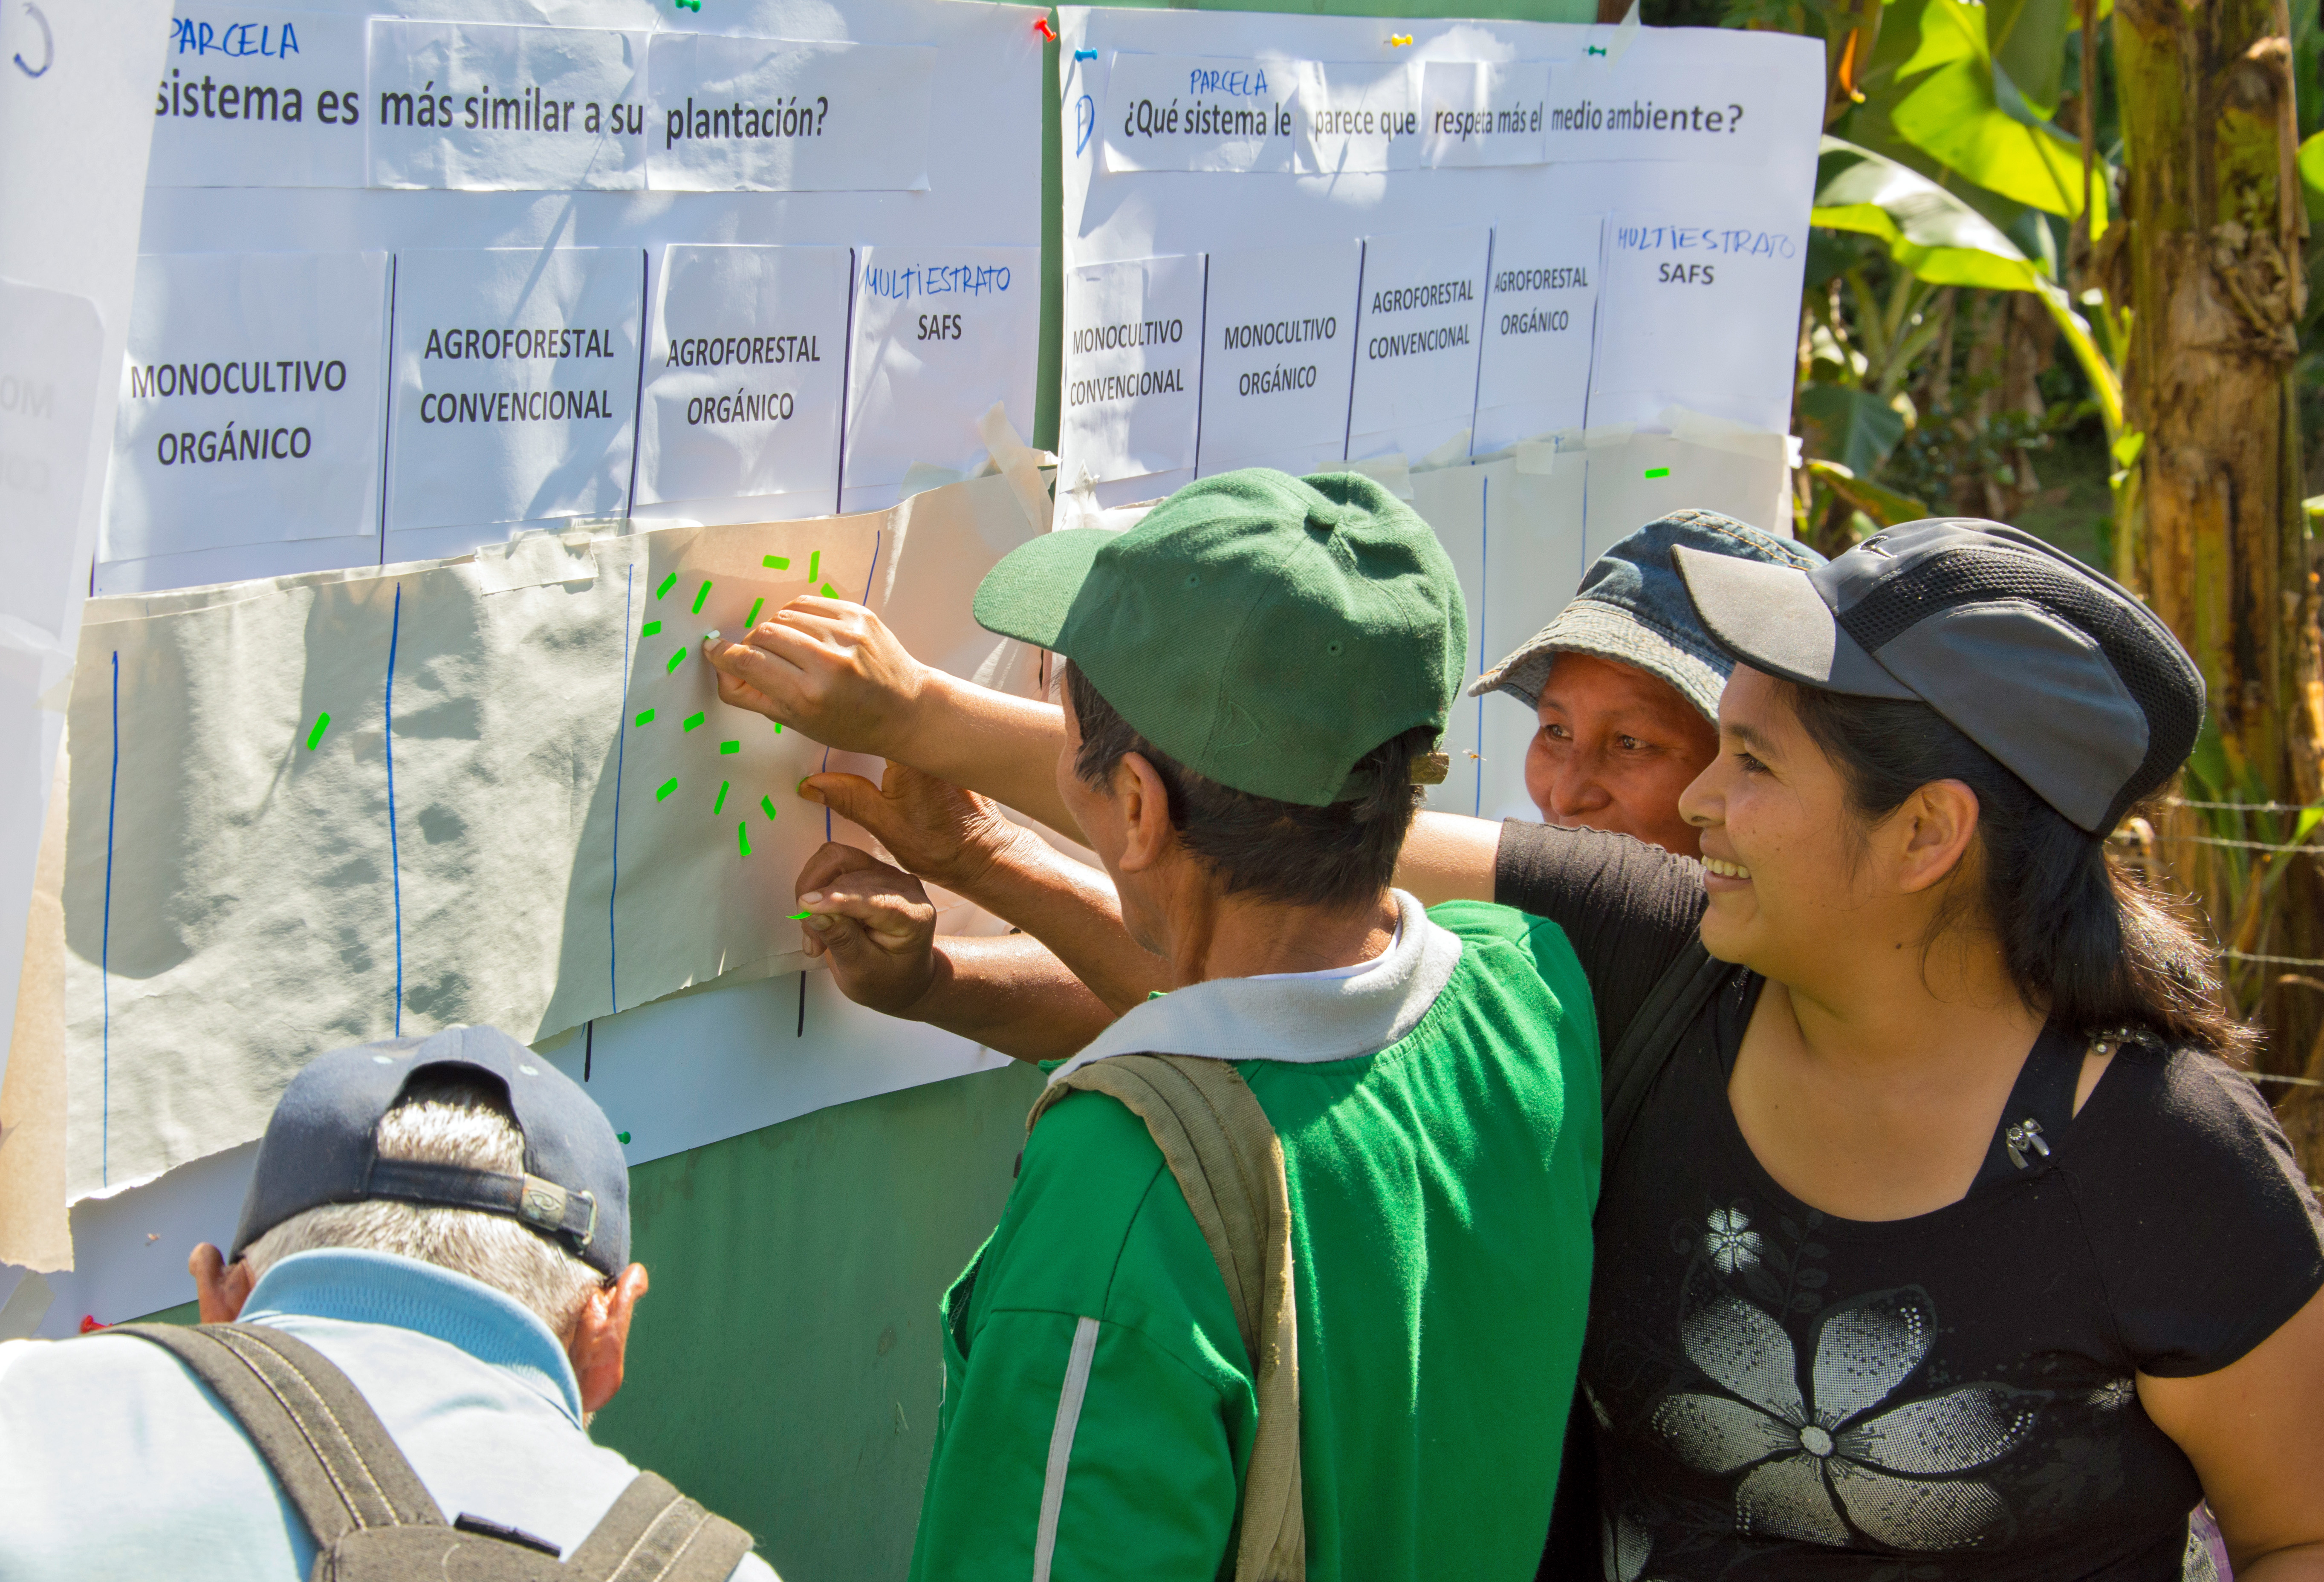 Participants of the open door event, after visiting the long-term trail, agree that the organic agroforestry treatment is the most similar to their own cocoa plantation.